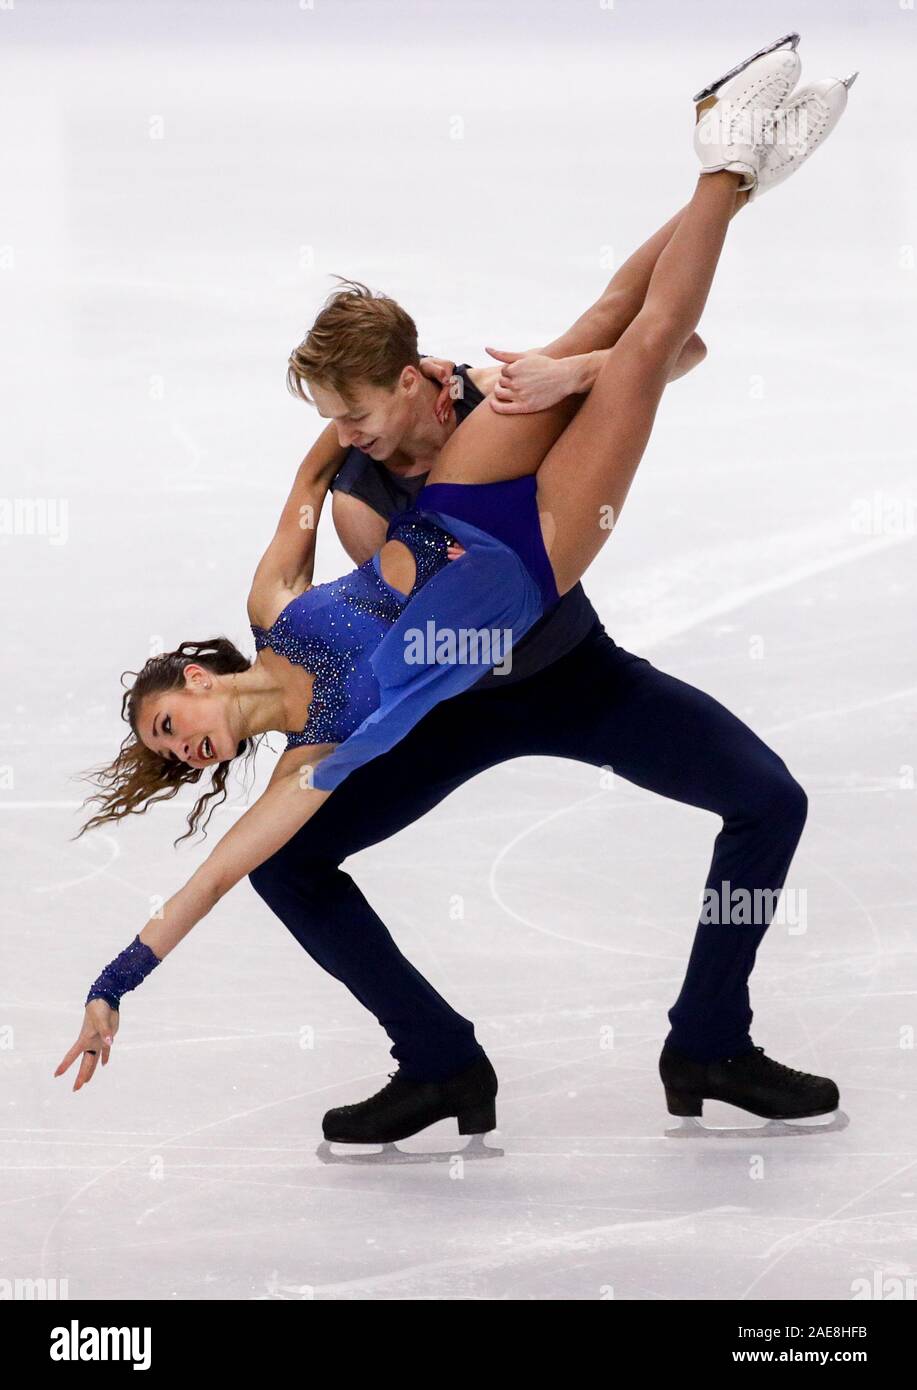 Turin, Italy. 07th Dec, 2019. TURIN, ITALY - DECEMBER 7, 2019: Ice dancers  Diana Davis and Gleb Smolkin of Russia perform during a junior free dance  event at the 2019-20 ISU Grand